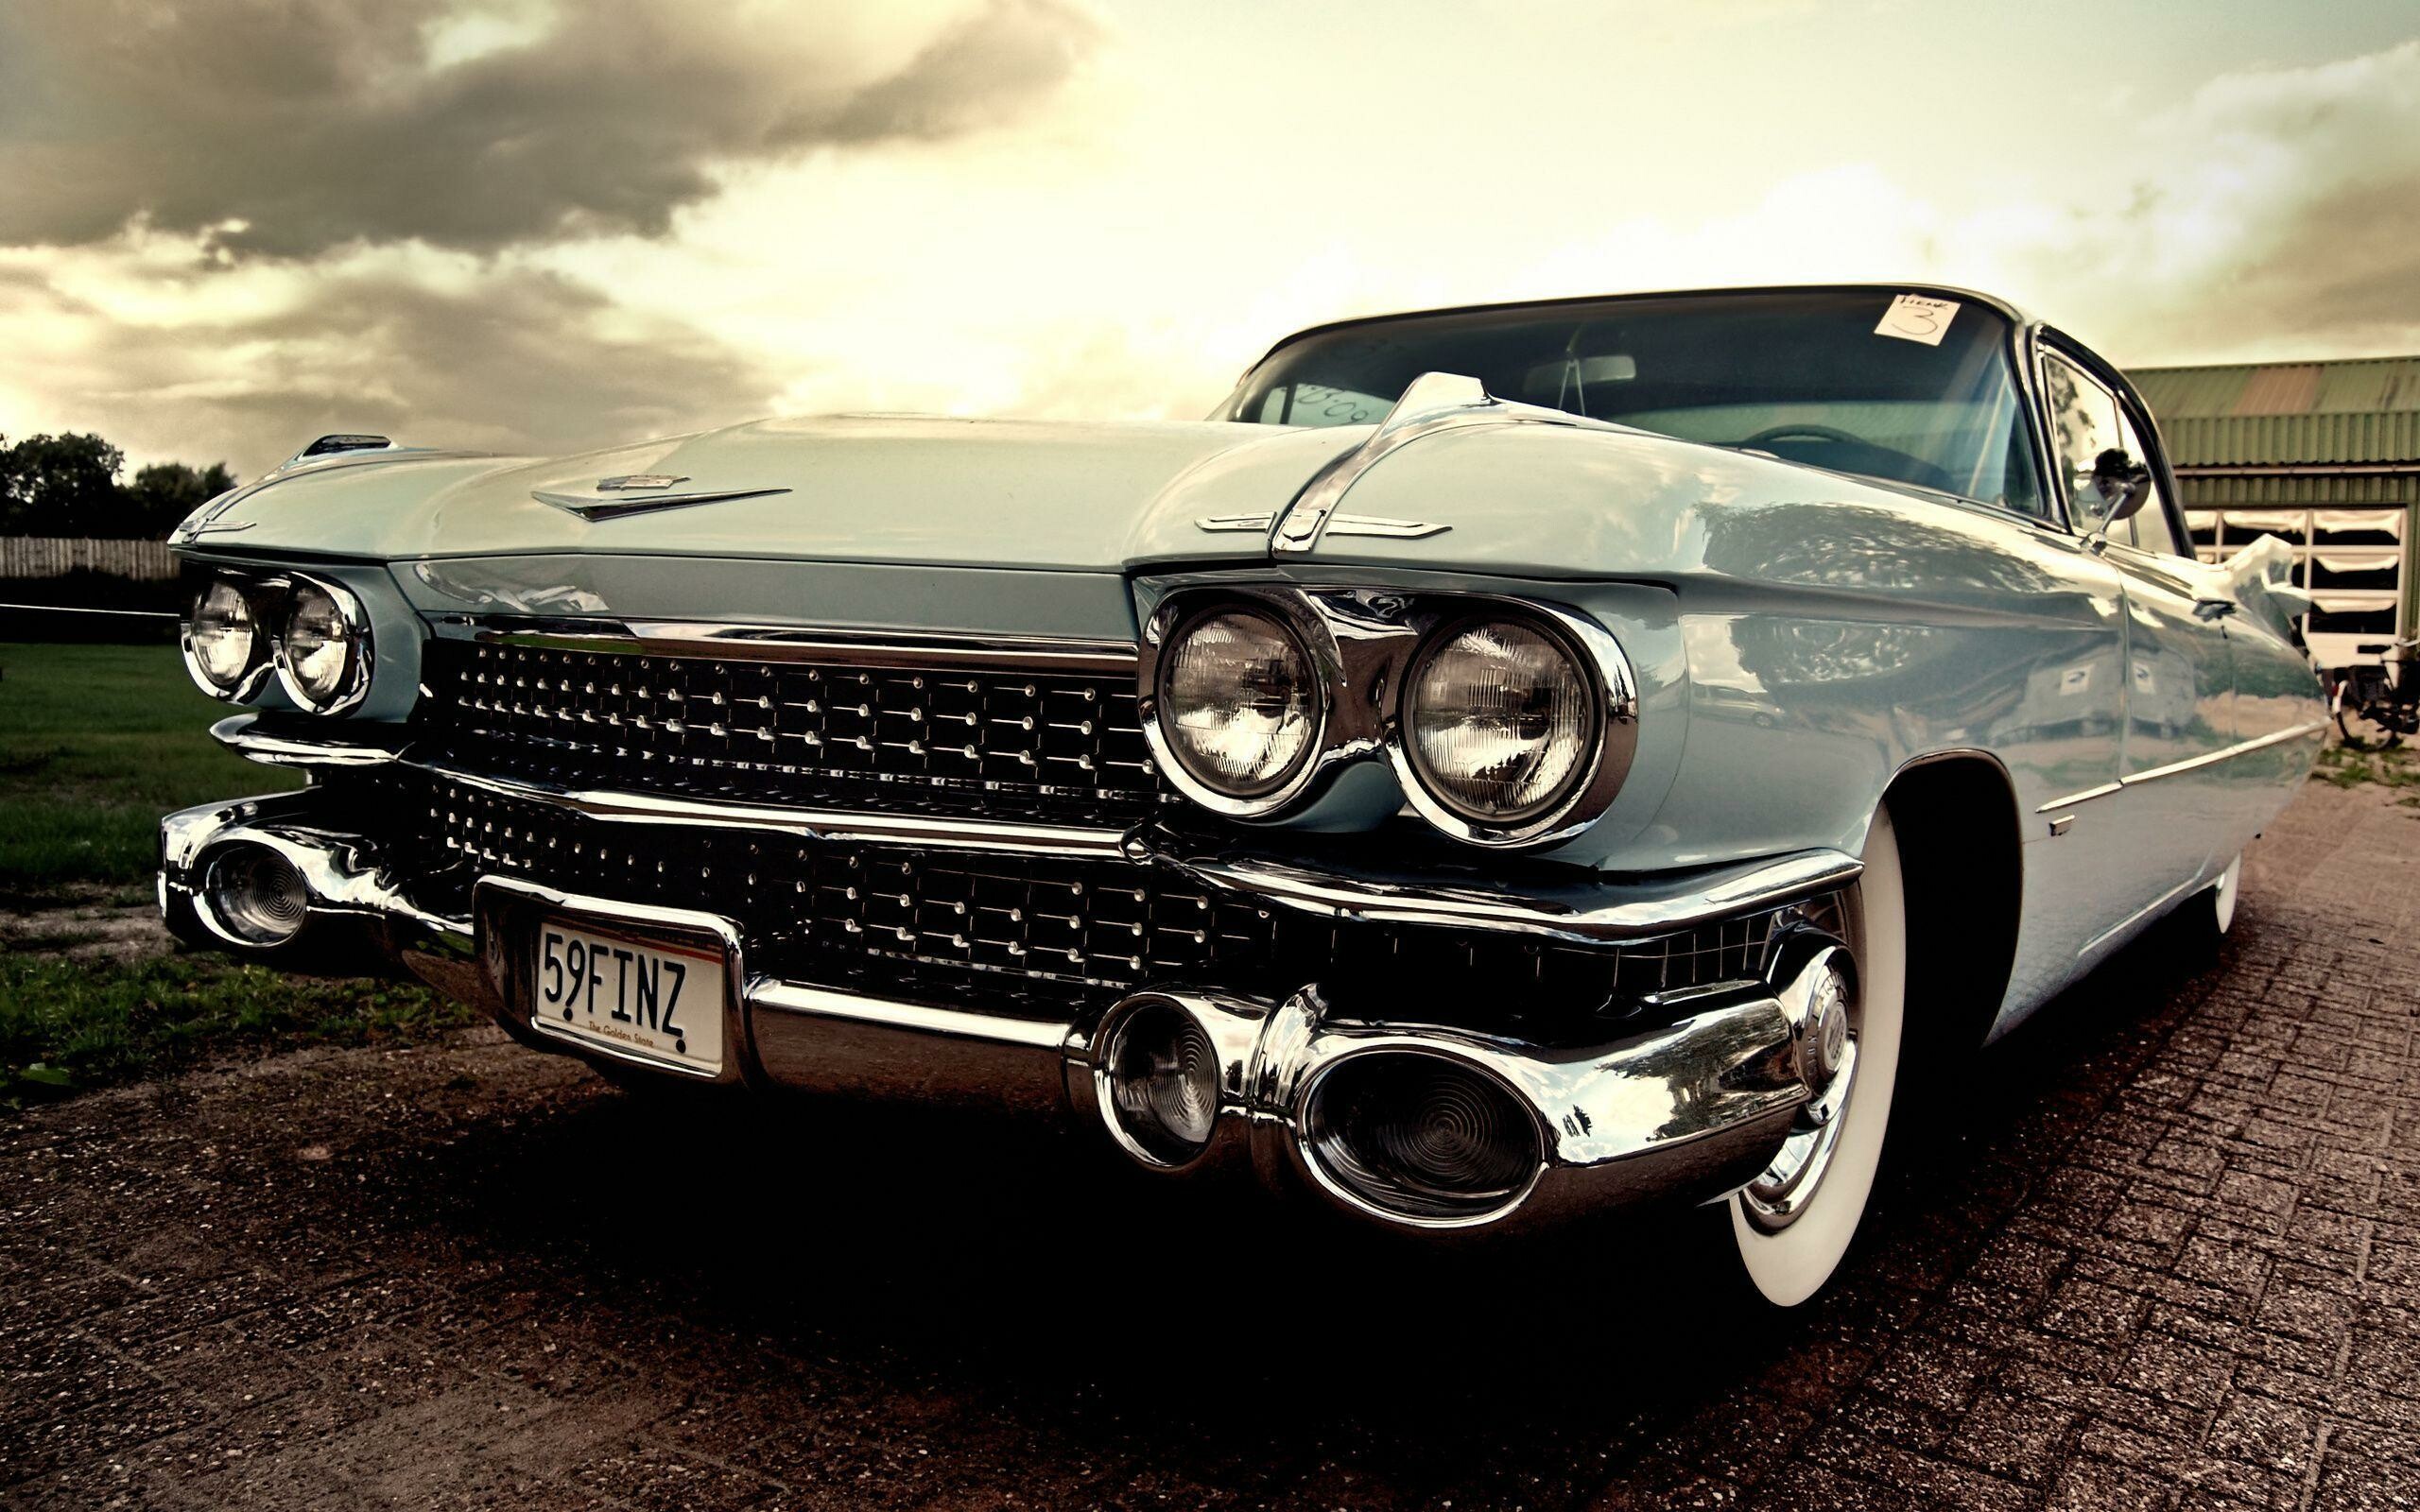 Old Cars Wallpaper: HD, 4K, 5K for PC and Mobile. Download free image for iPhone, Android